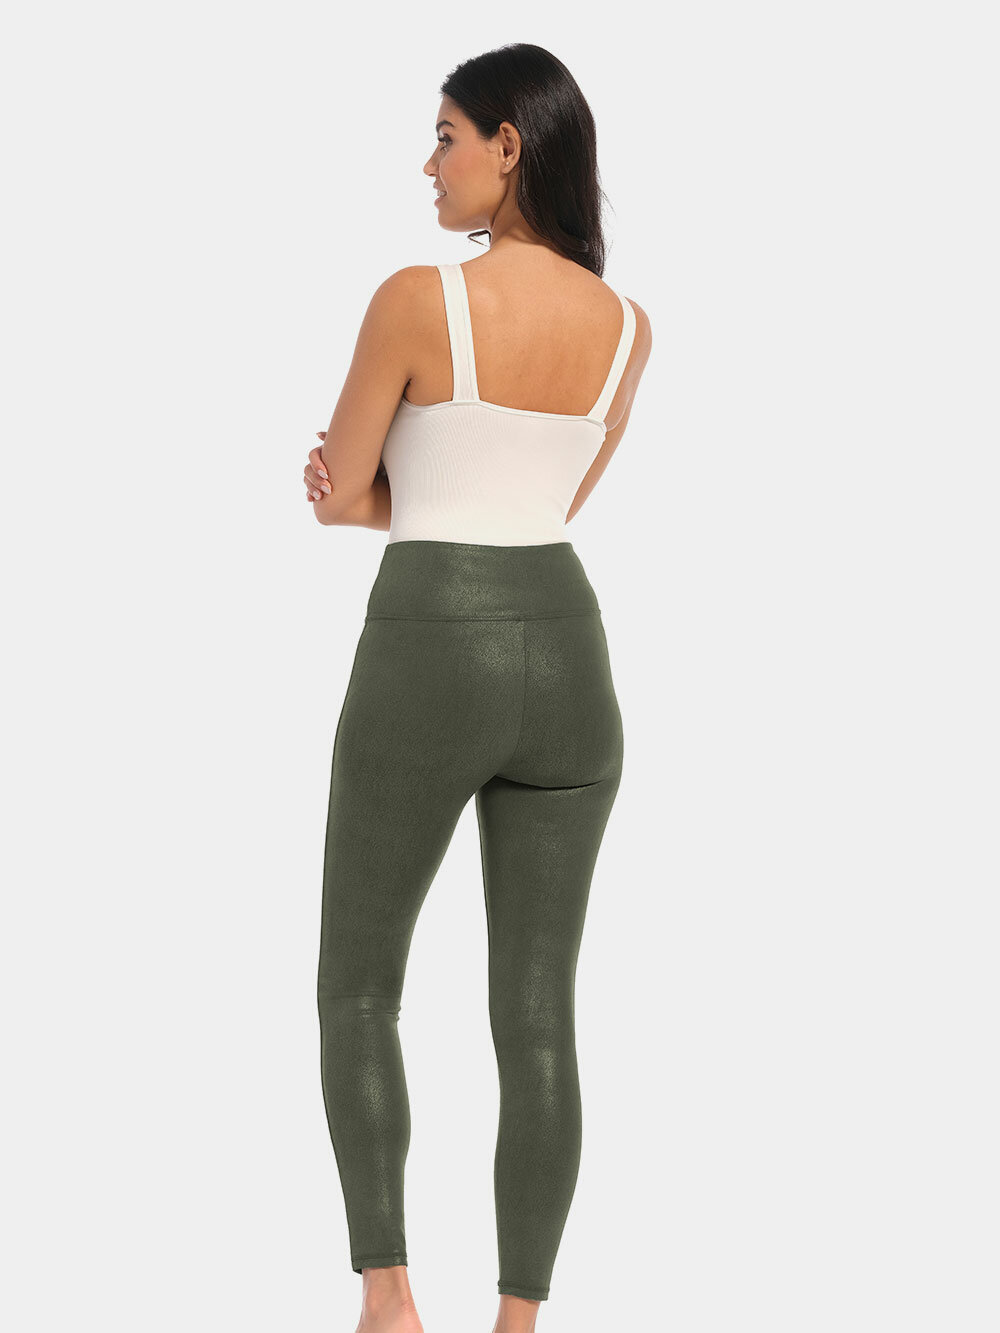 Sexy High Waisted Faux Leather Skinny Maternity Leather Leggings